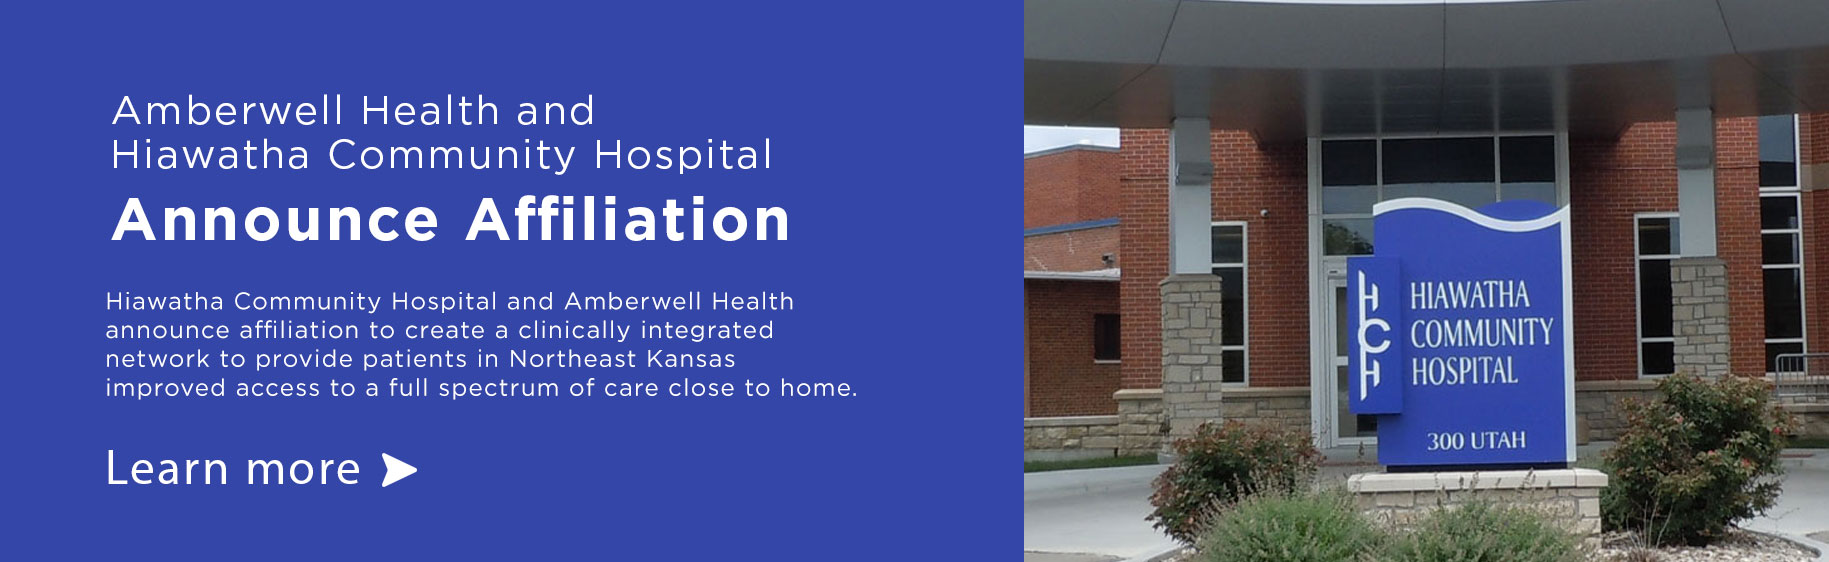 Banner picture of Hiawatha Community Hospital 
300 UTAH

Amberwell Health and Community Hospital and announce  affiliation to create a clinically integrated network to provide patients in Northeast Kansas improved access to a full spectrum of care of care close to home
-Learn More